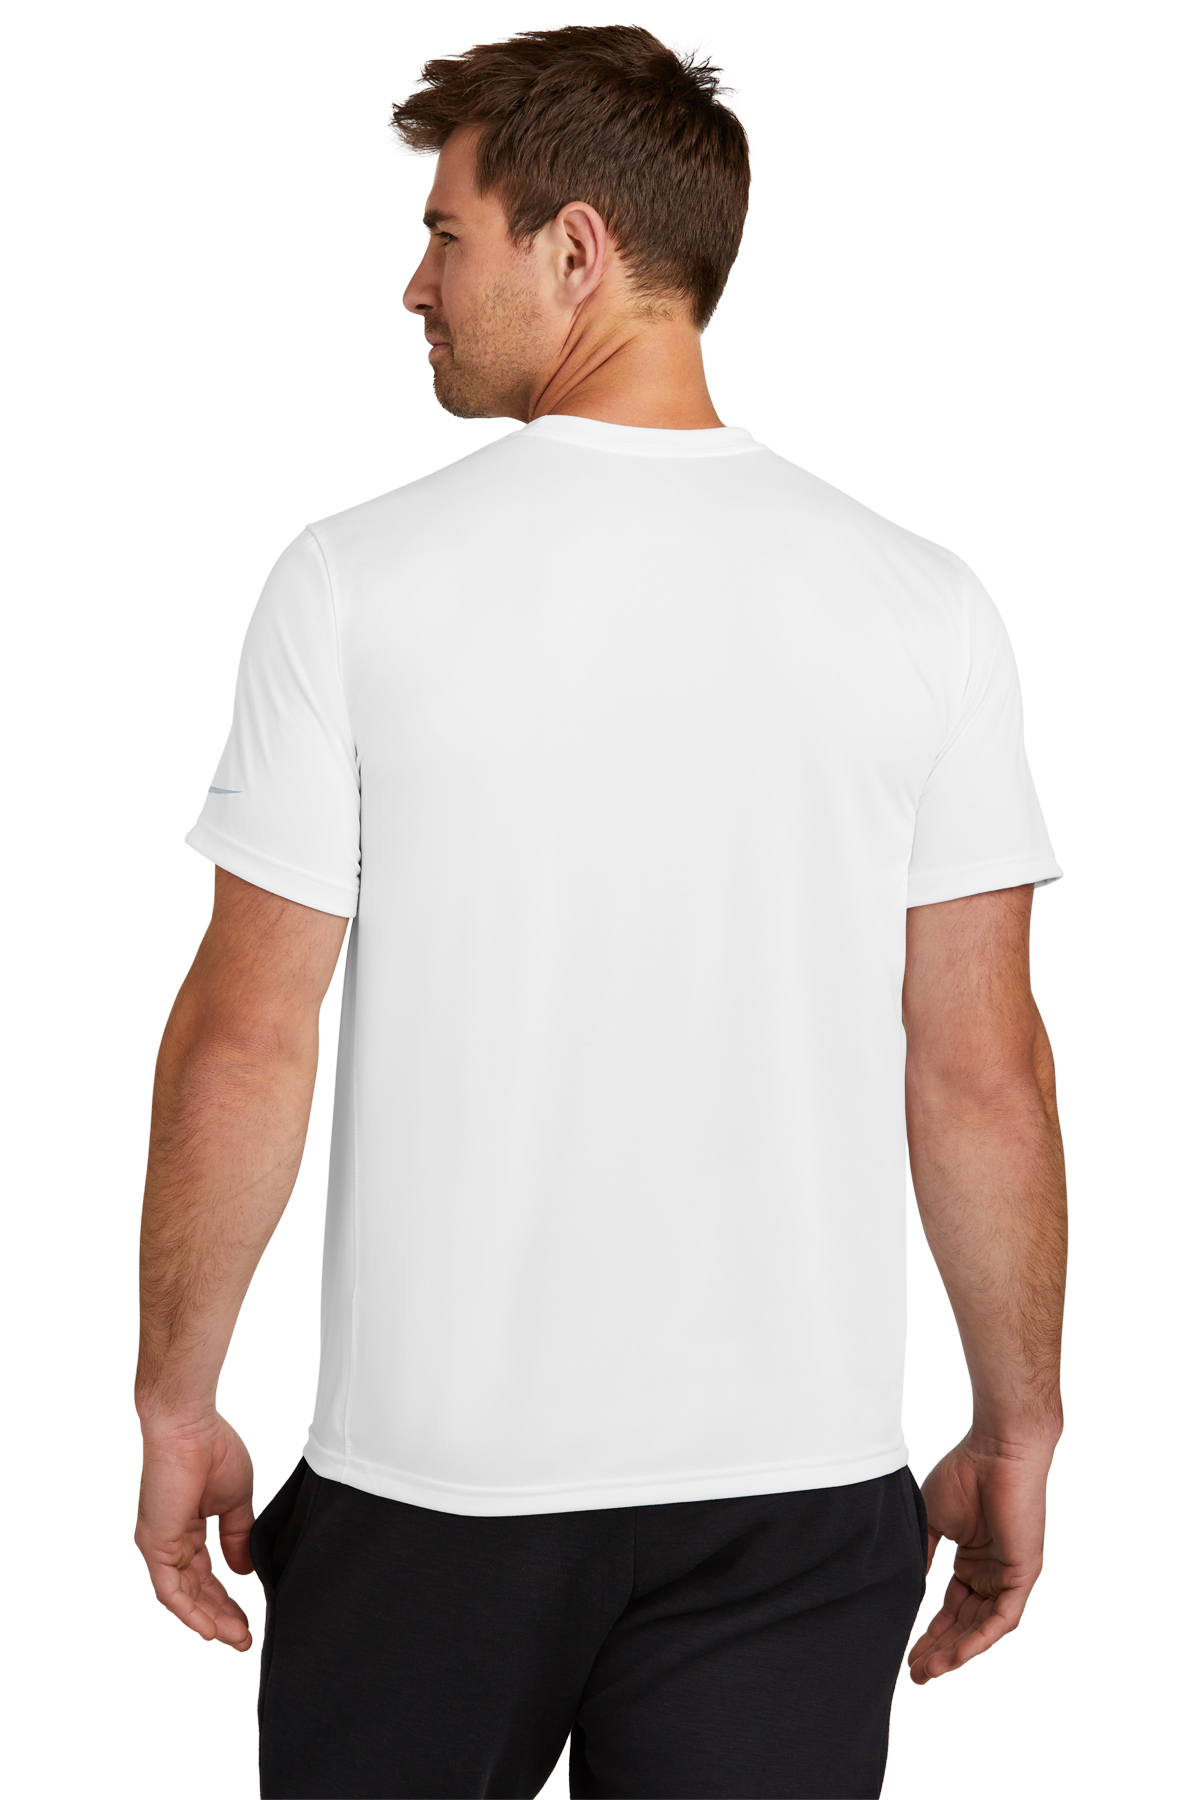 NEW Underarmour Dri Fit T-Shirt (tags removed)